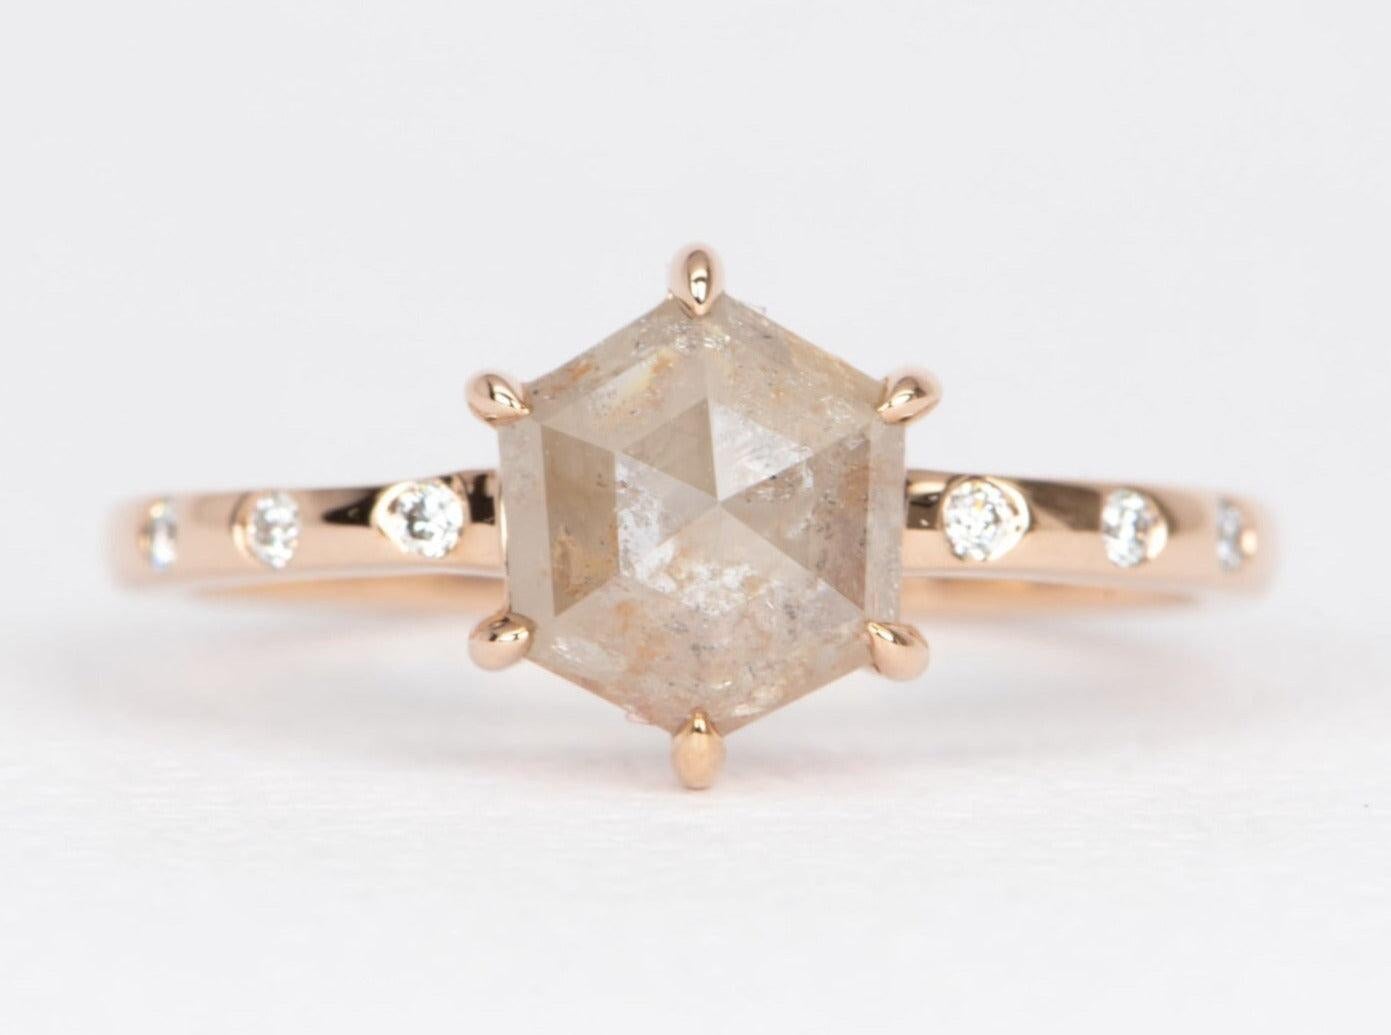 ♥ Solid 14K rose gold ring set with a unique hexagon diamond in the cetner and diamond accents
♥ The setting measures 9.1 mm in length, 8 mm in width, and sits 5.1 mm in height

♥ Ring Size: US Size 7 (Free re-sizing up or down one size)
♥ Band